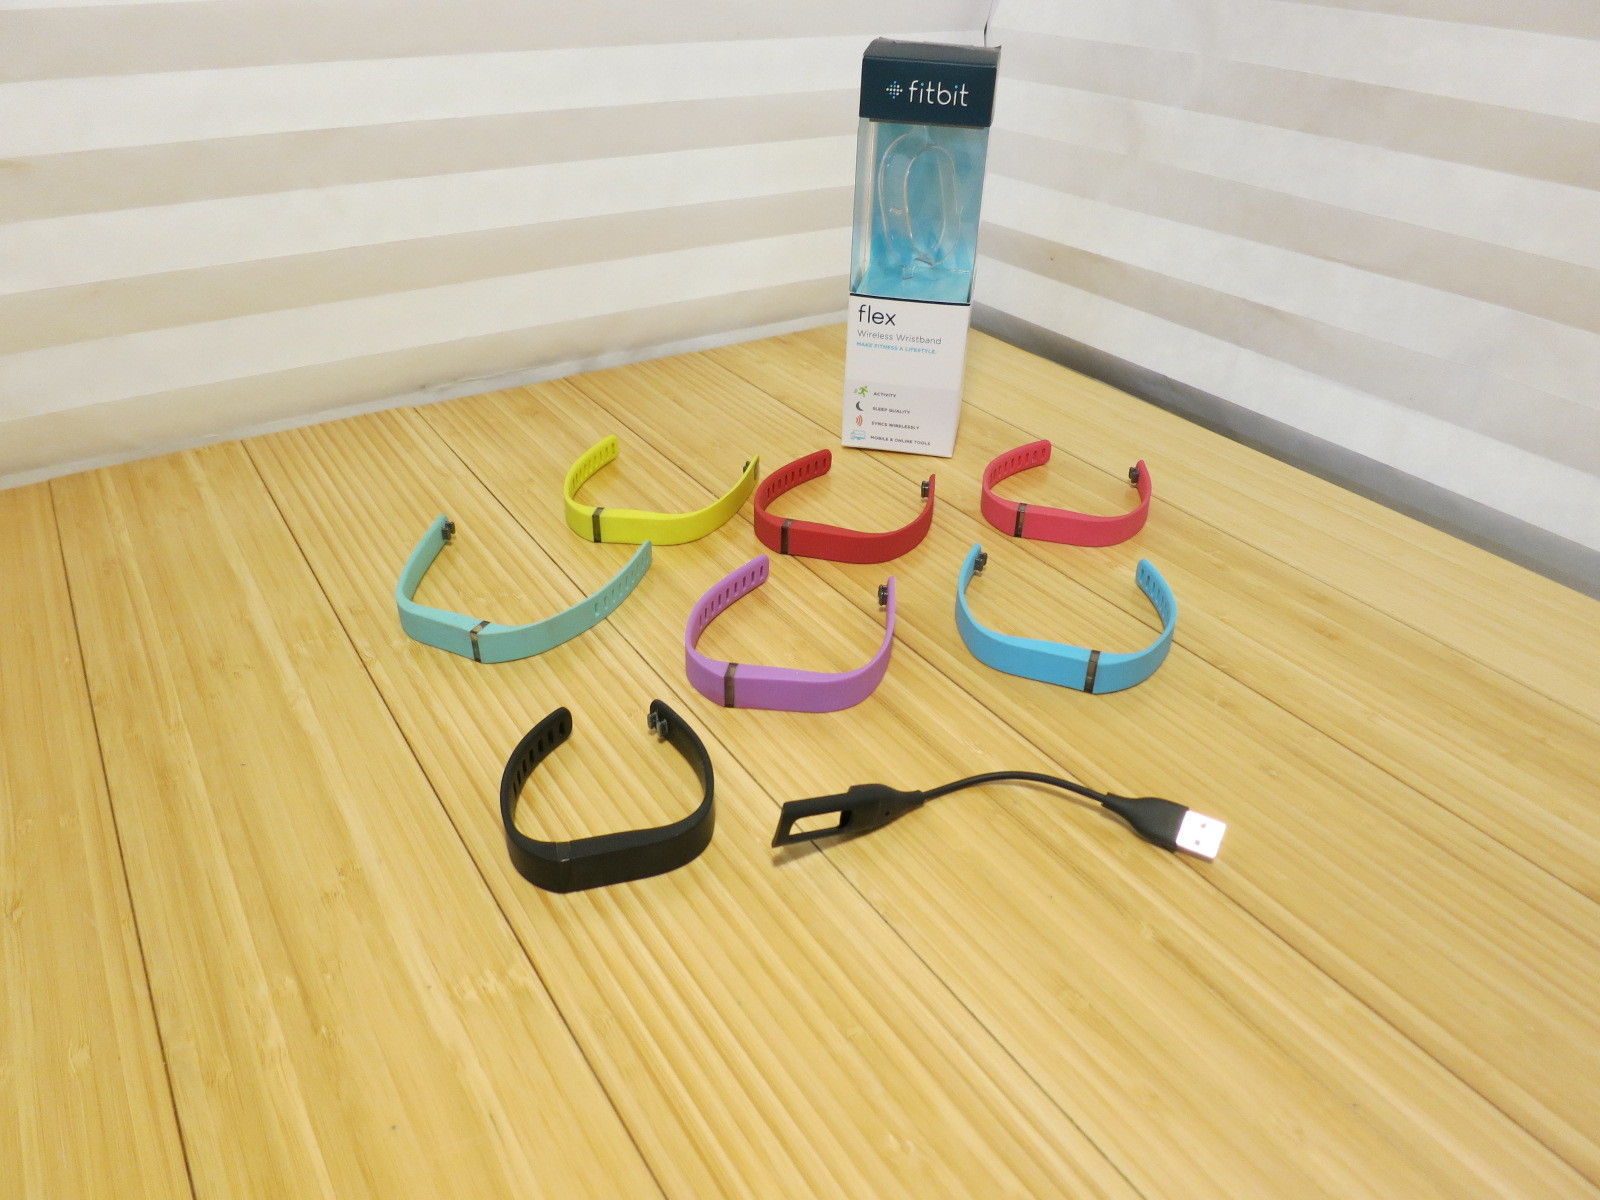 FitBit Flex Wireless Wristband Tracker Activity With 6 Large & 1 Small Bands - $41.89